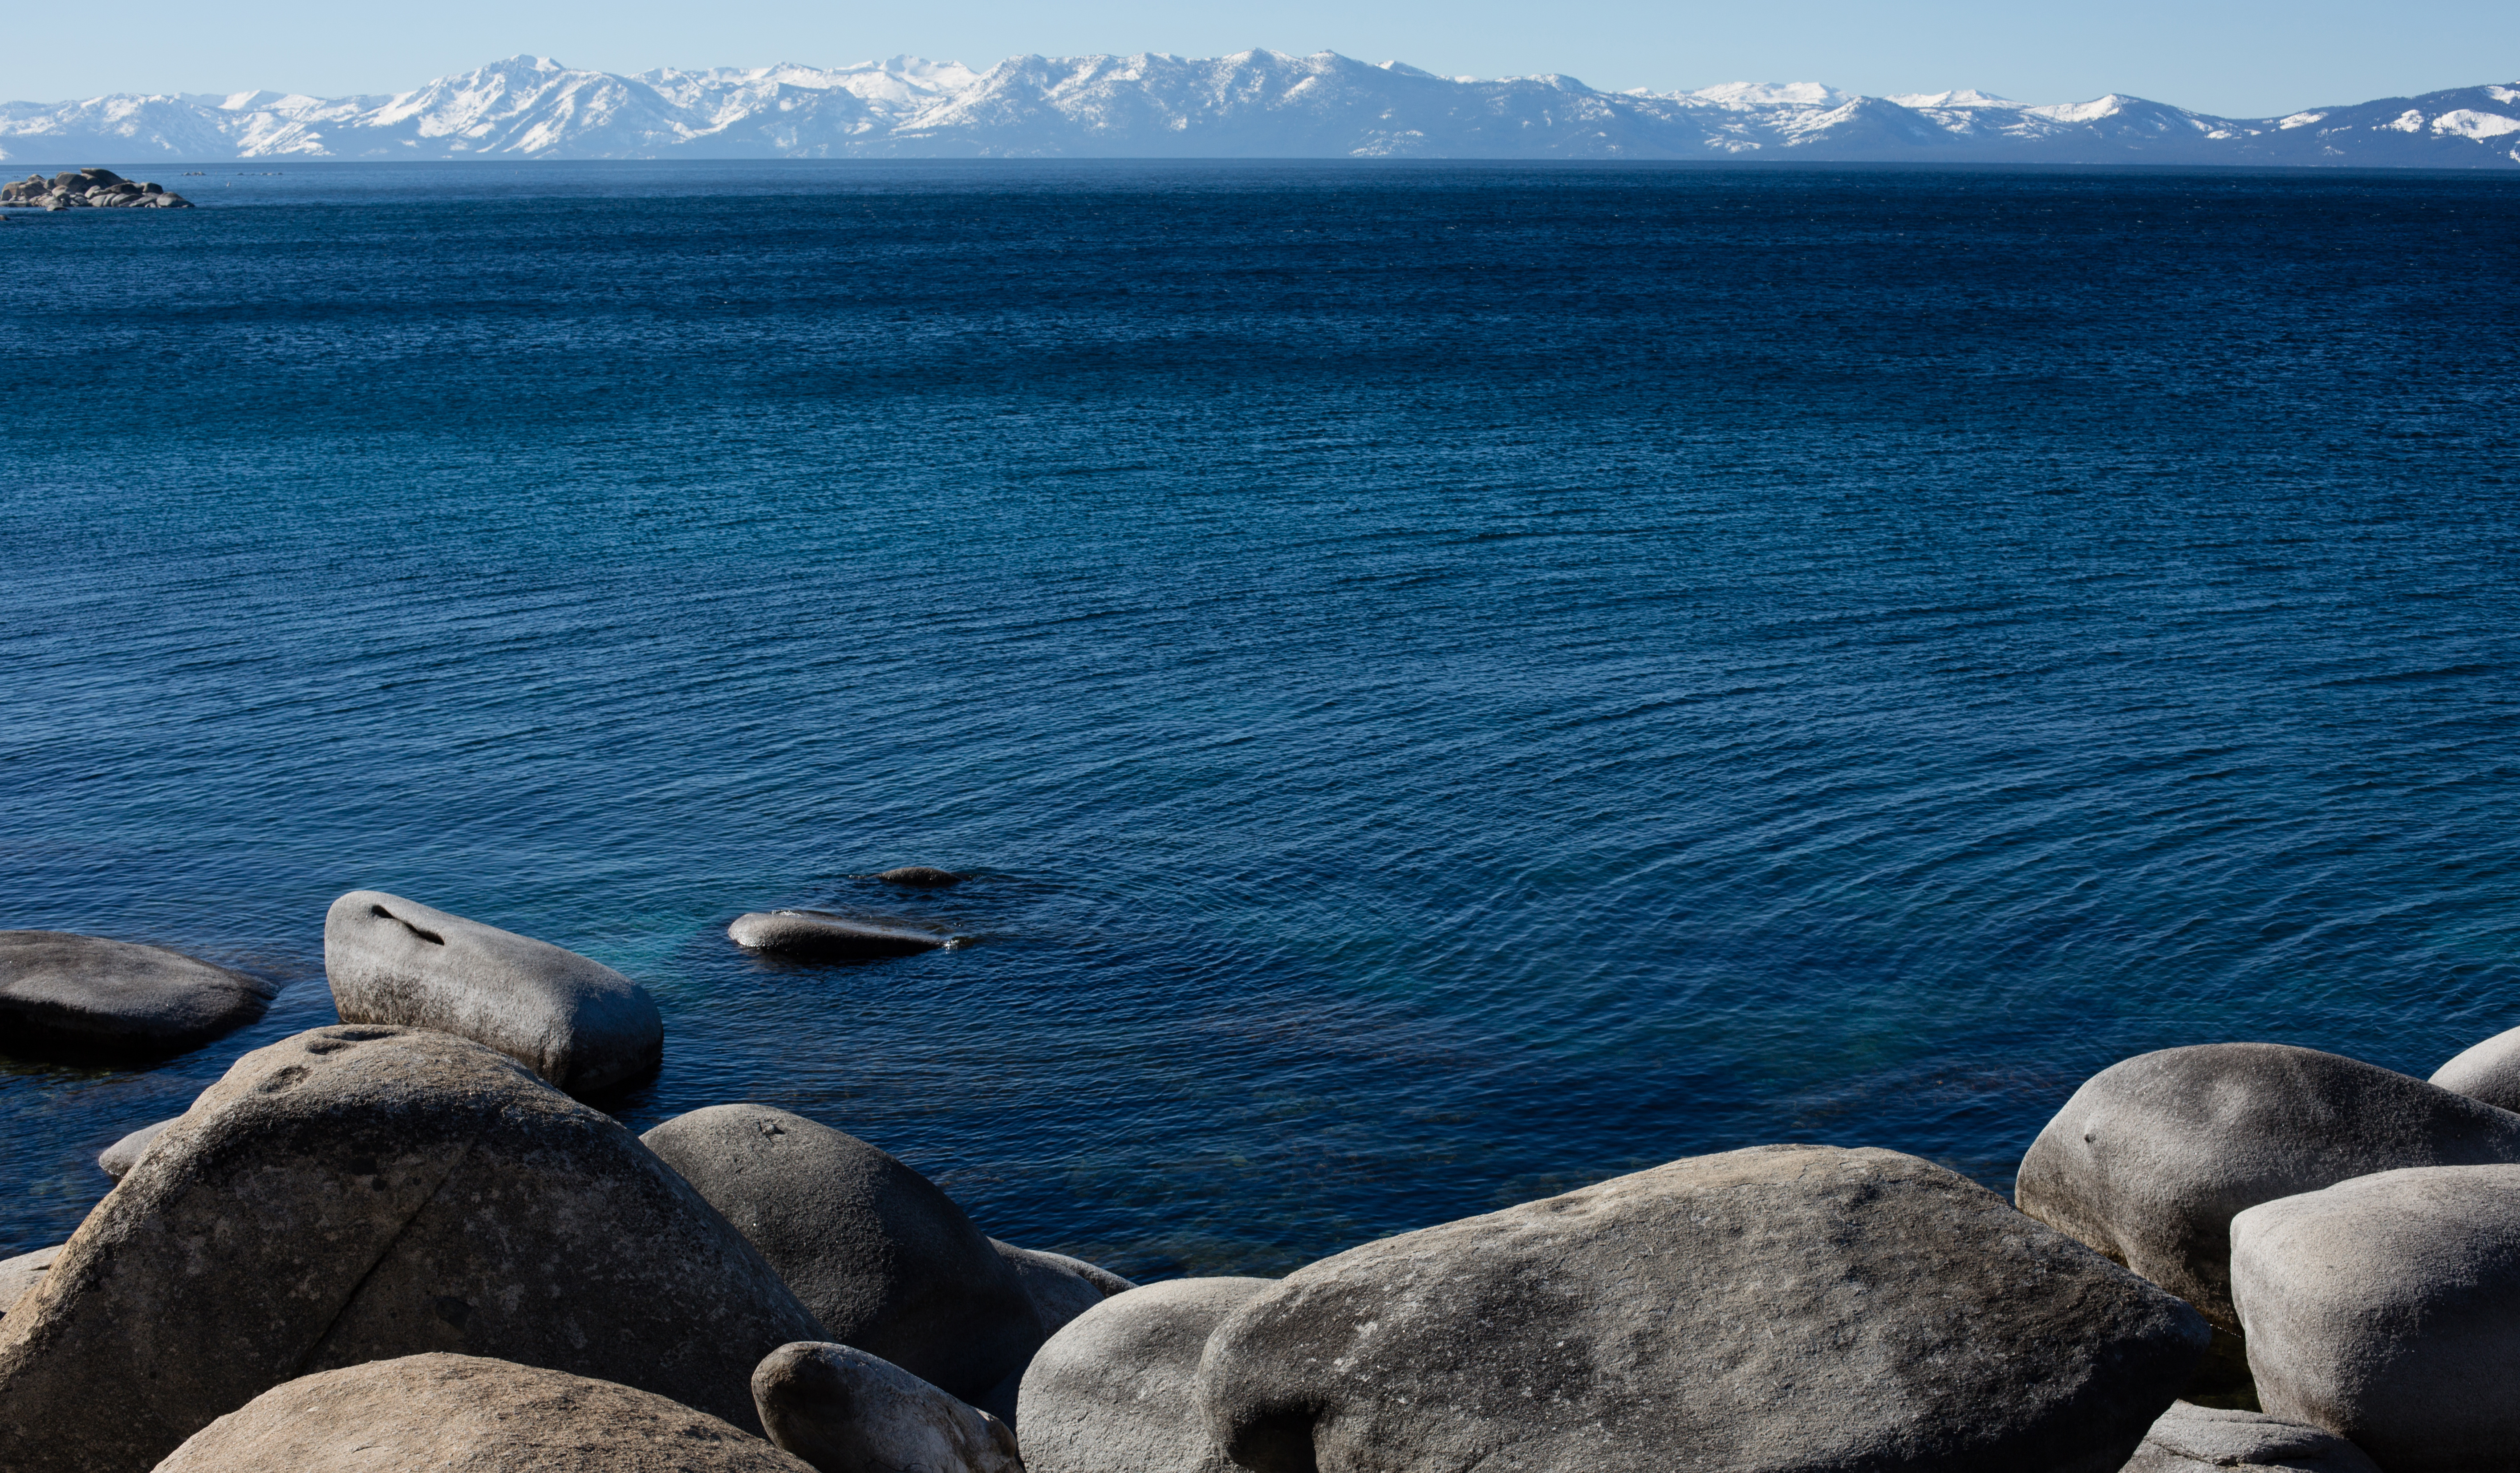 Lake Tahoe's brilliant blue waters and rocky east shore in the afternoon.